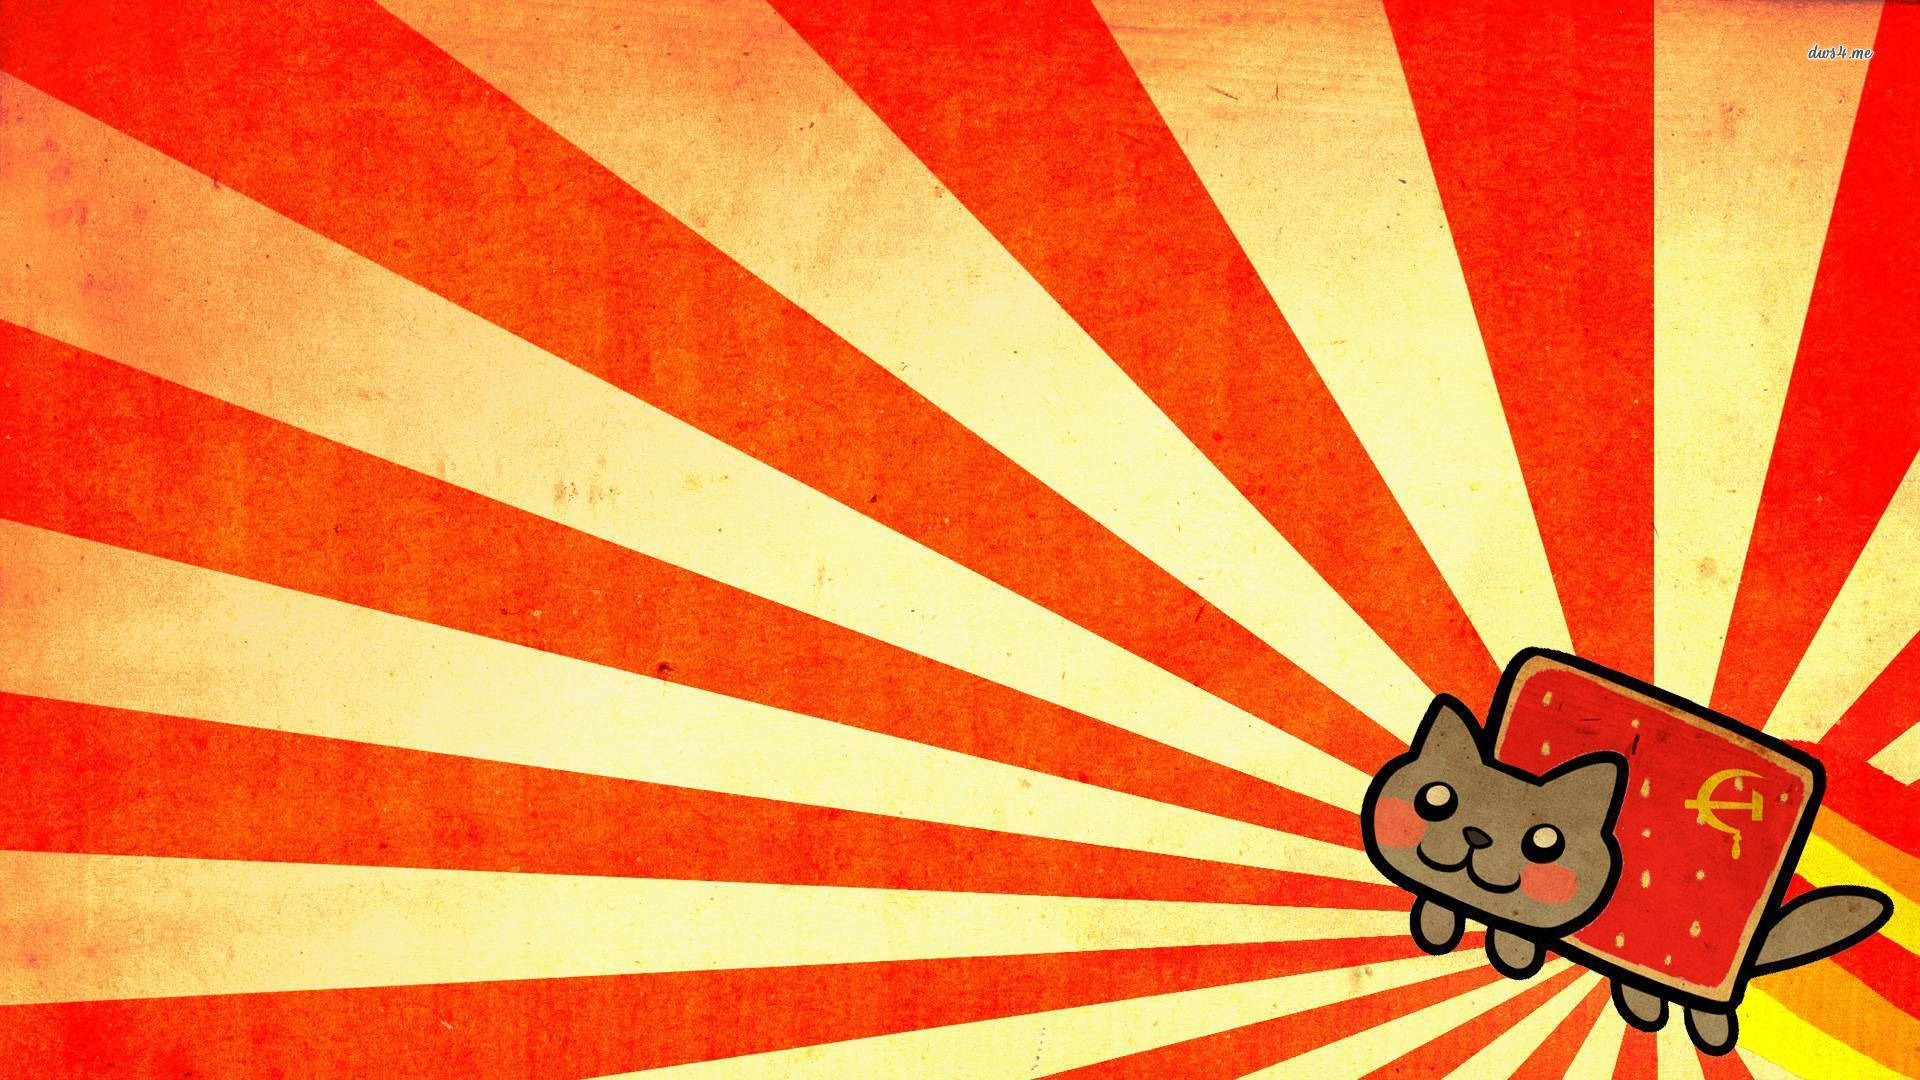 Cat meme in a bright orange and yellow stripes background wallpaper.